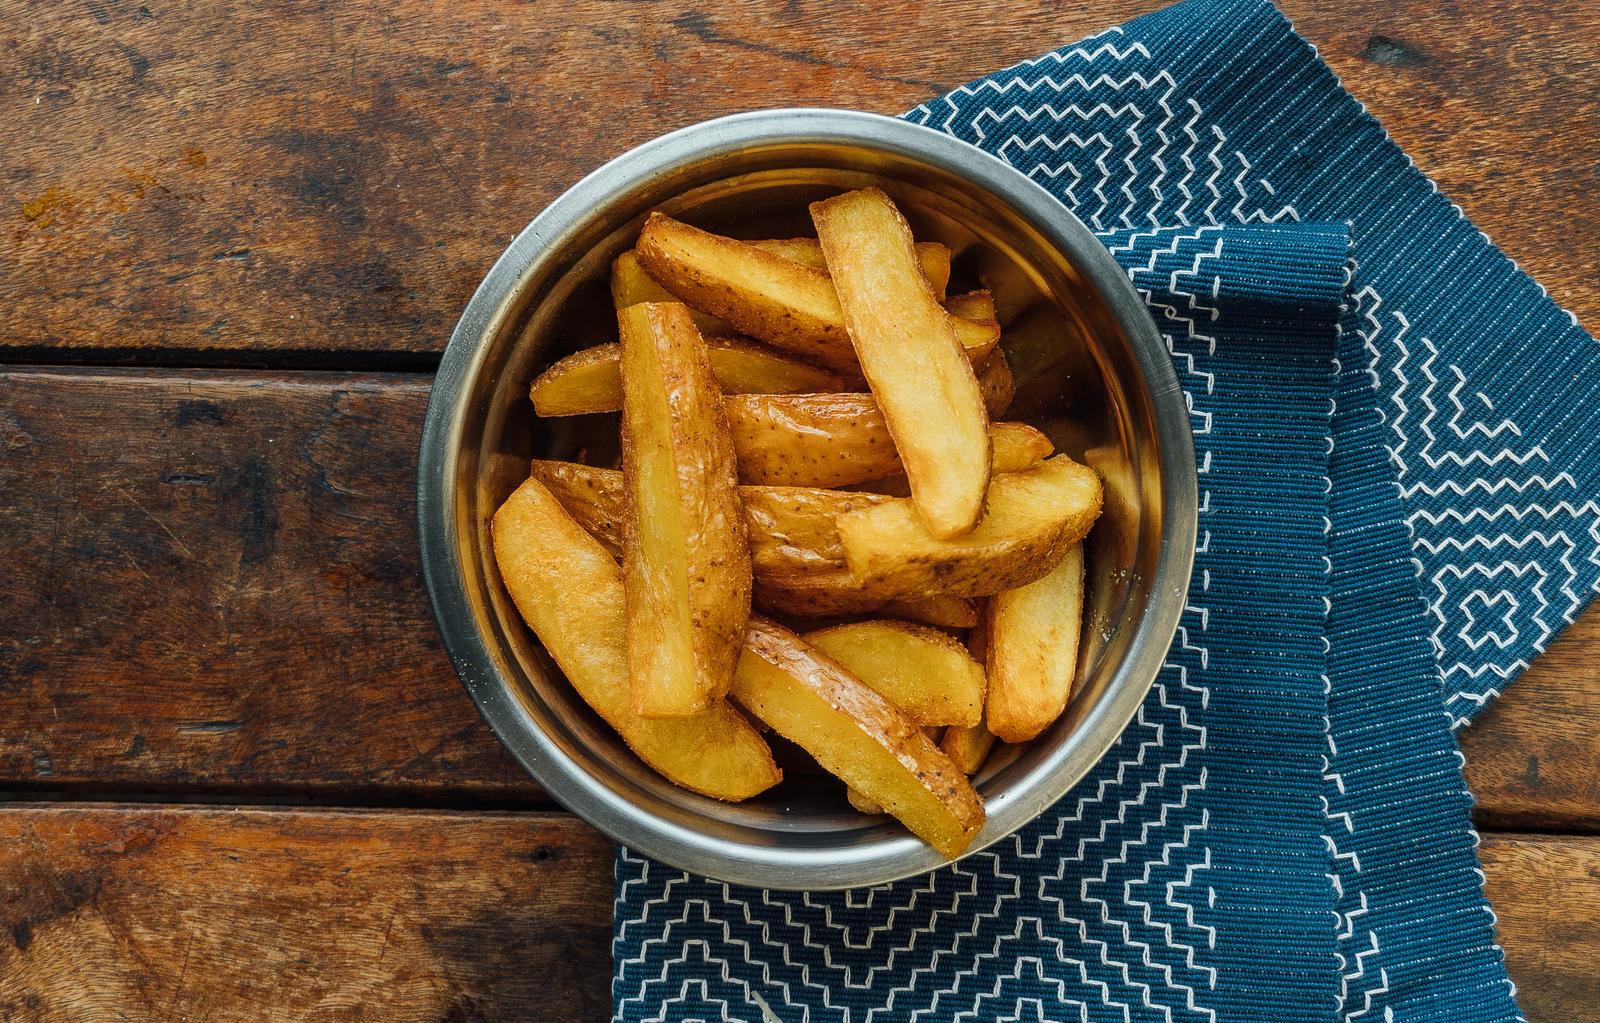 🥔 Choose Some of Your Favorite Potato Dishes and We’ll Tell You Your Best Quality Fries